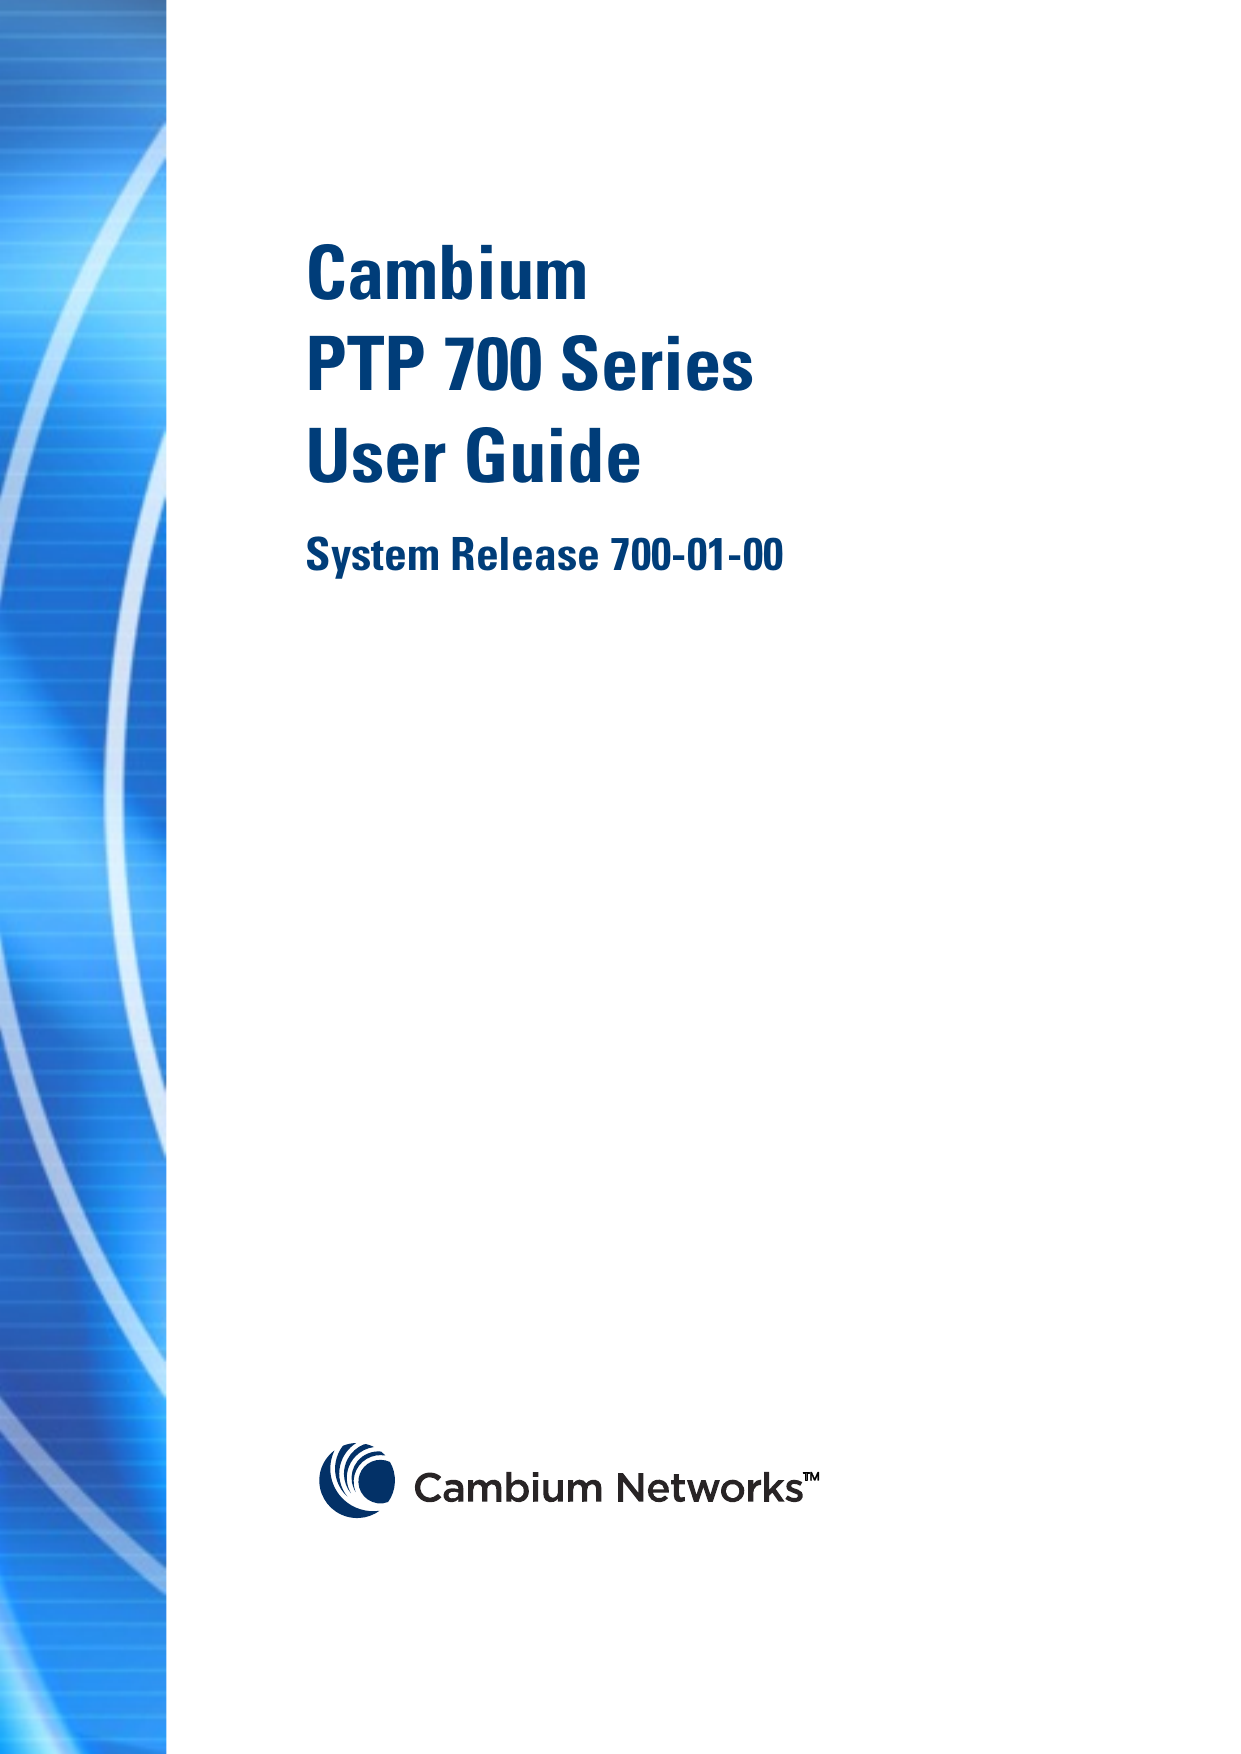 F  Cambium  PTP 700 Series  User Guide System Release 700-01-00                       